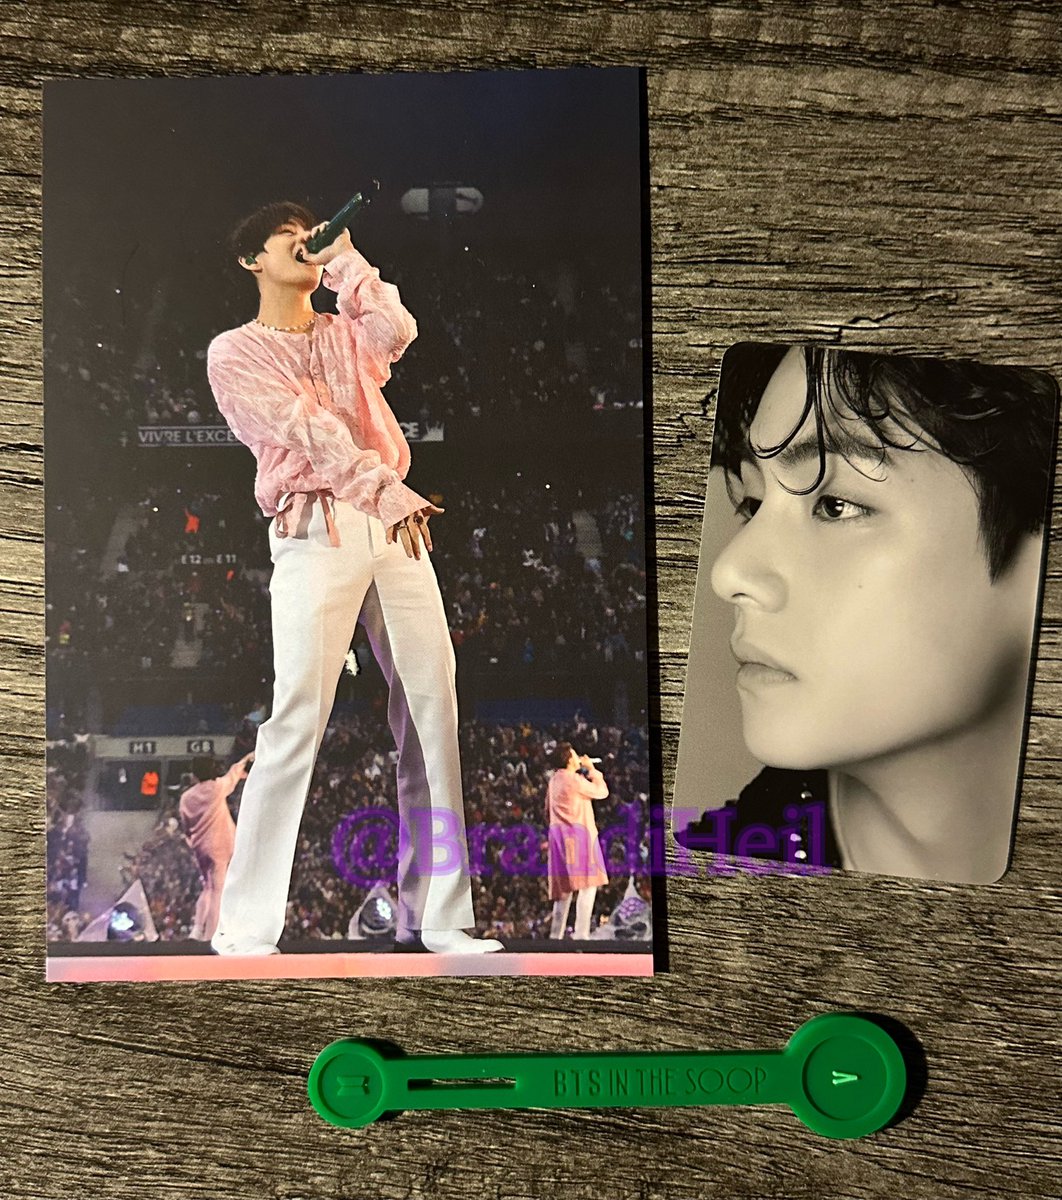 ❄️V PACK GA❄️ ❄️MBF ❄️RT/Like ❄️1 winner-US/WW ❄️1 entry per person ❄️Sent by stamped mail ❄️Official Break the Silence postcard, Dicon PC, ITS cup marker ❄️Post your country & fave song of Taehyung ❄️Ends 1/23 12PM CST #BTS #BTSGIVEAWAY